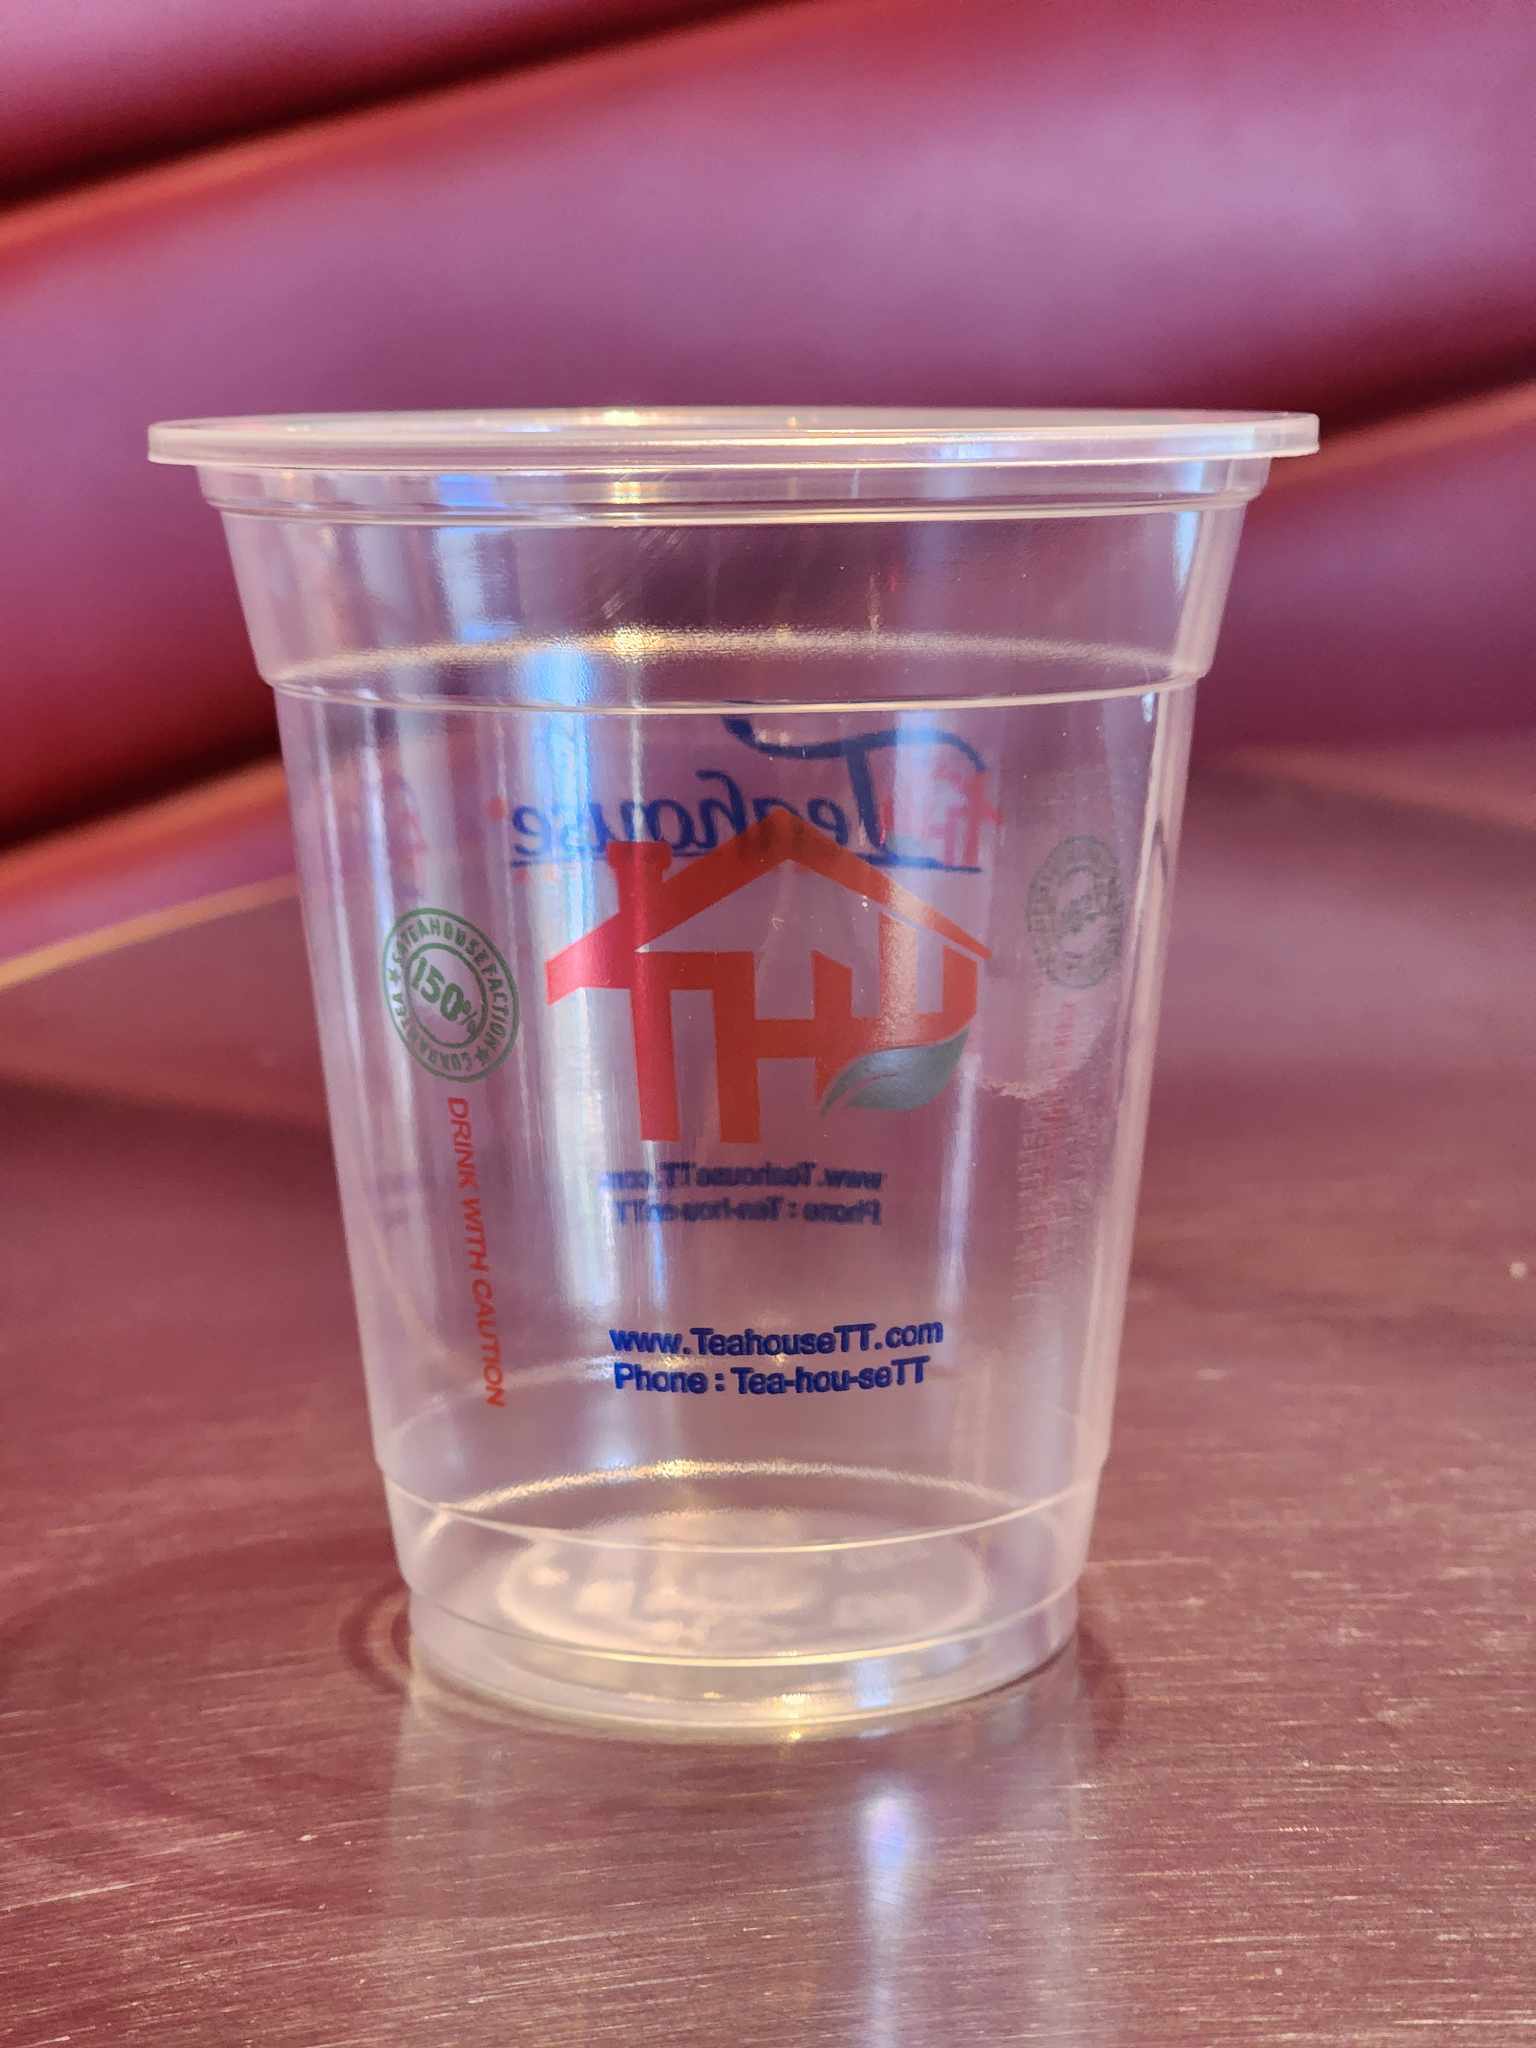 The Teahouse Plastic Cups